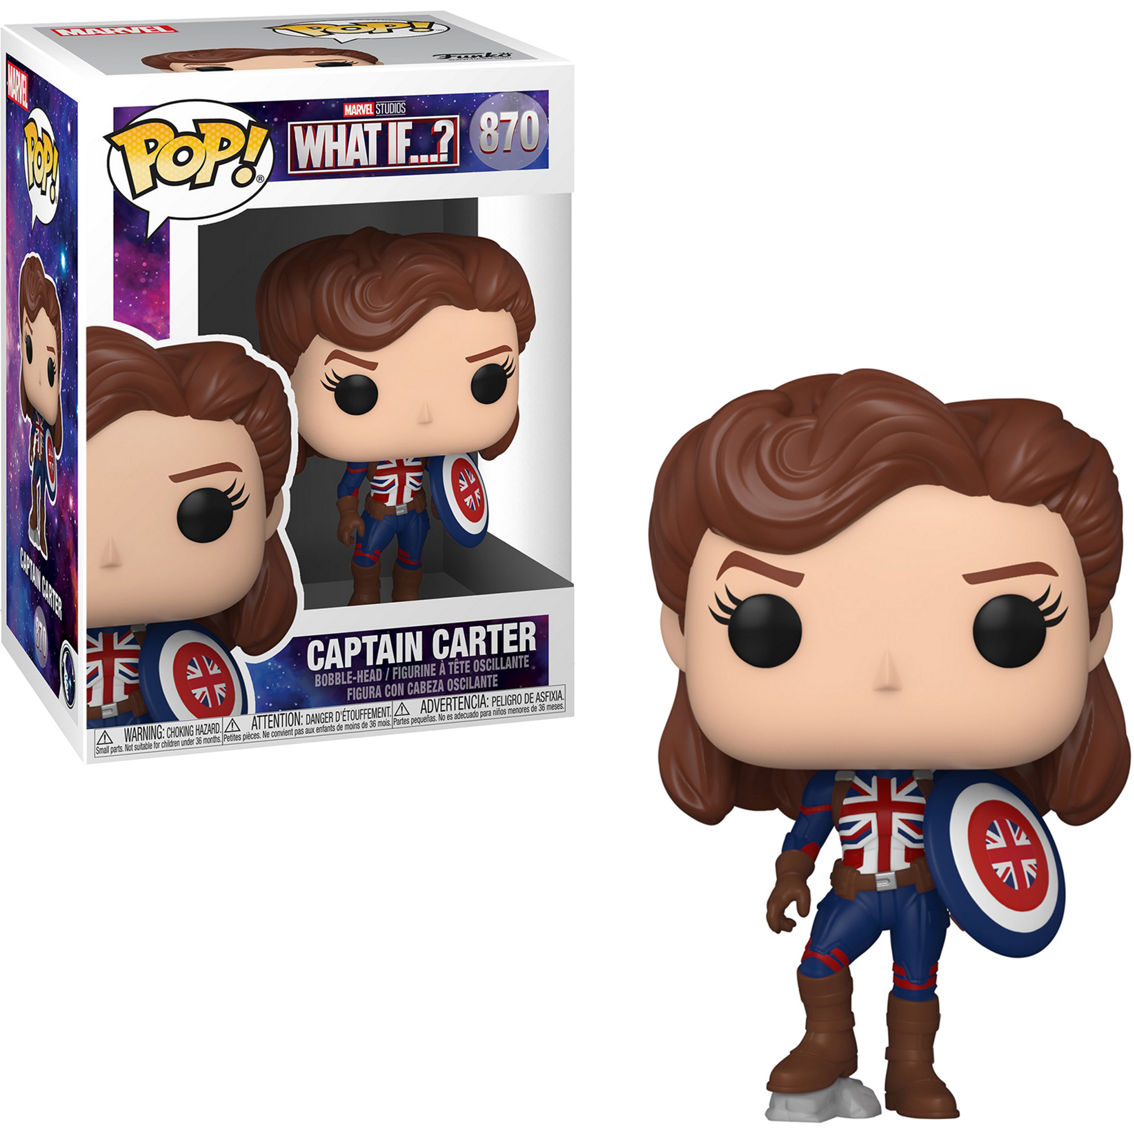 Funko POP! Marvel What If Collector Set - Image 3 of 7